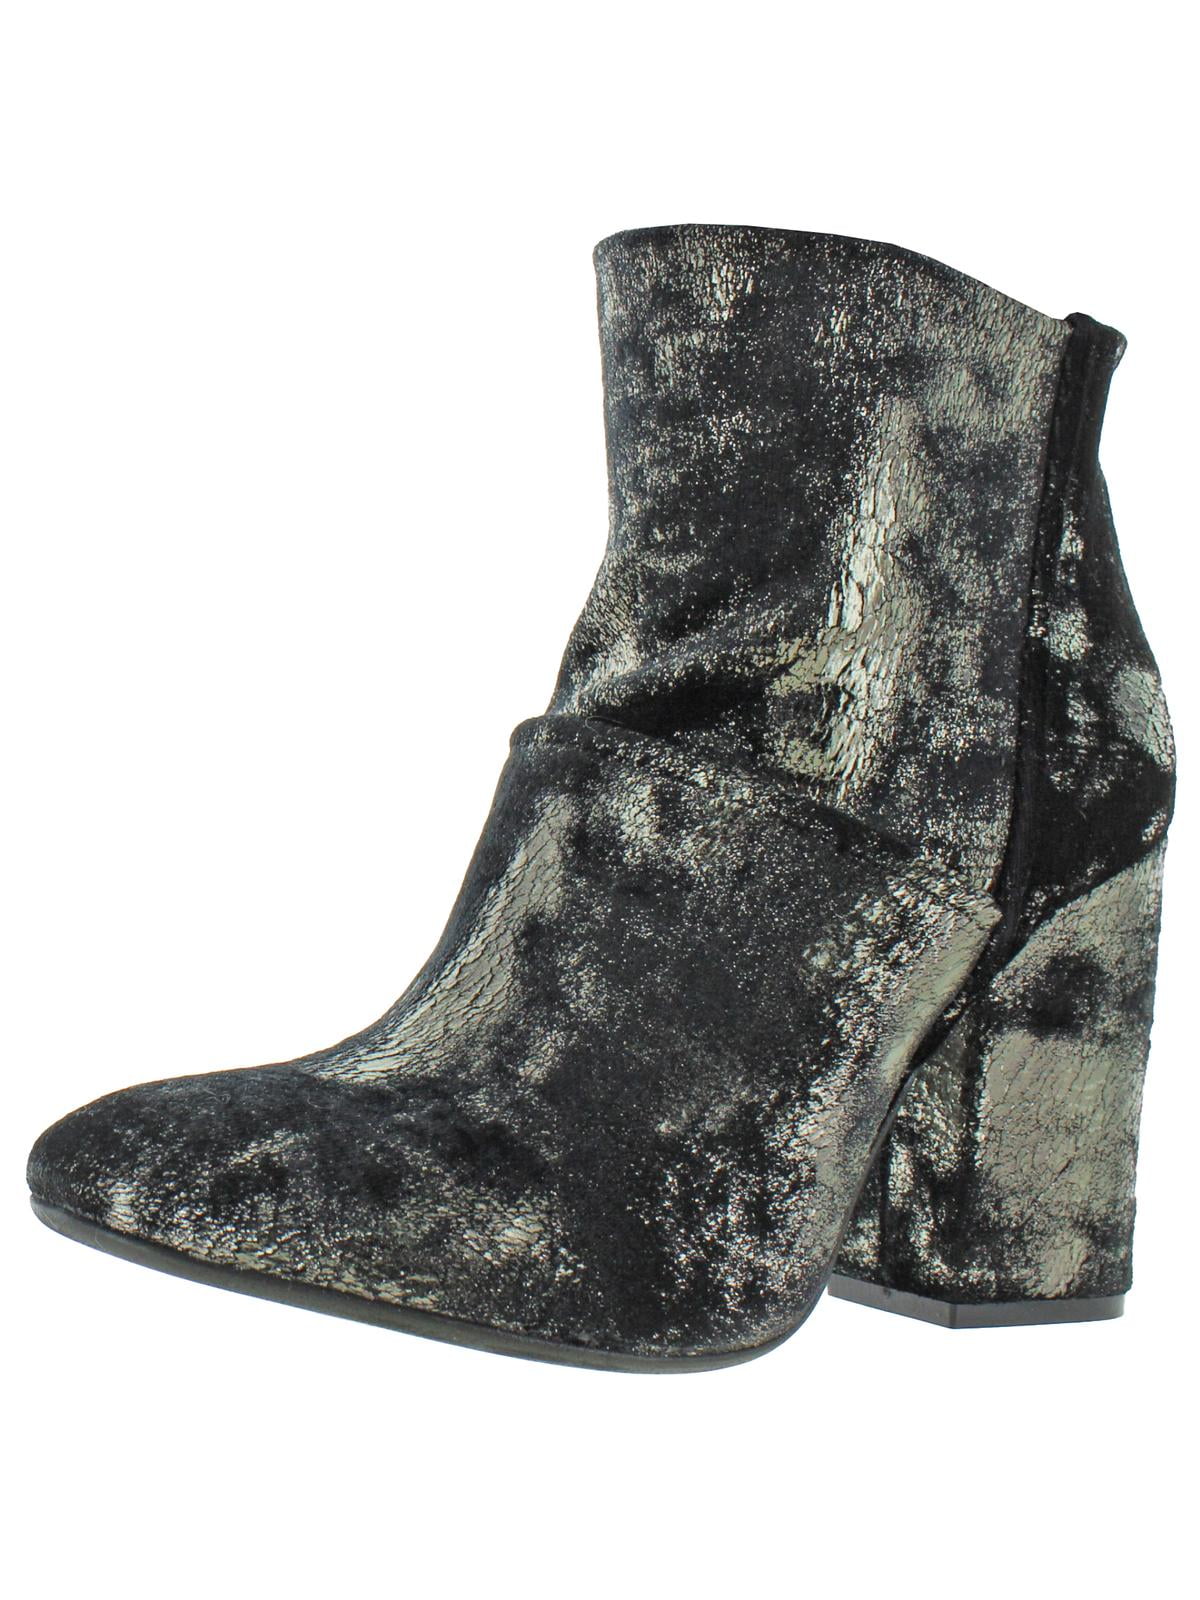 charles by charles david trudy mid bootie